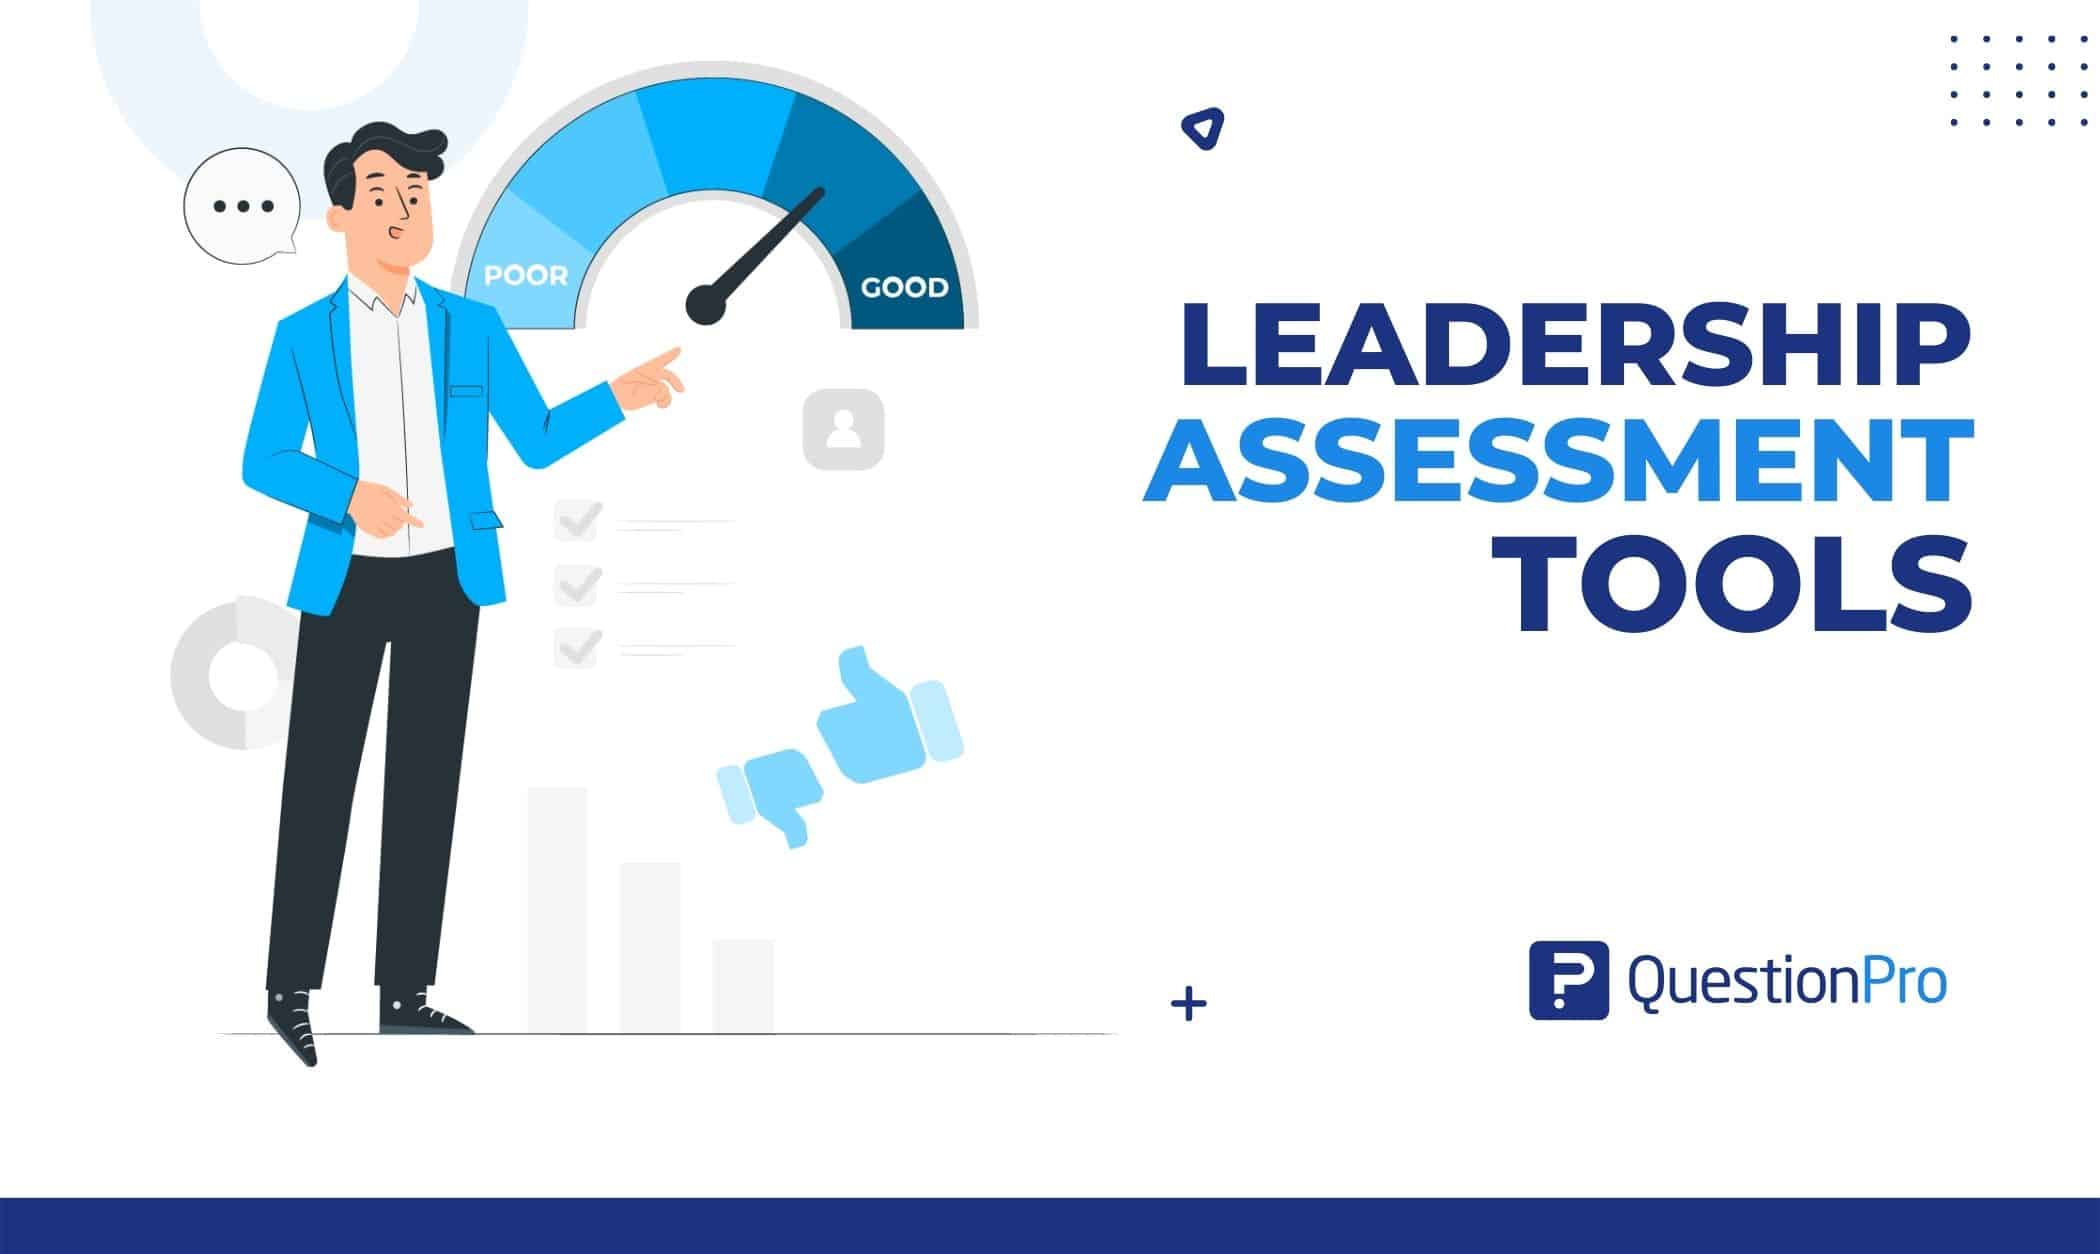 Leadership assessment tools describe an individual's leadership talents in several areas. Discover the 8 best leadership assessment tools.